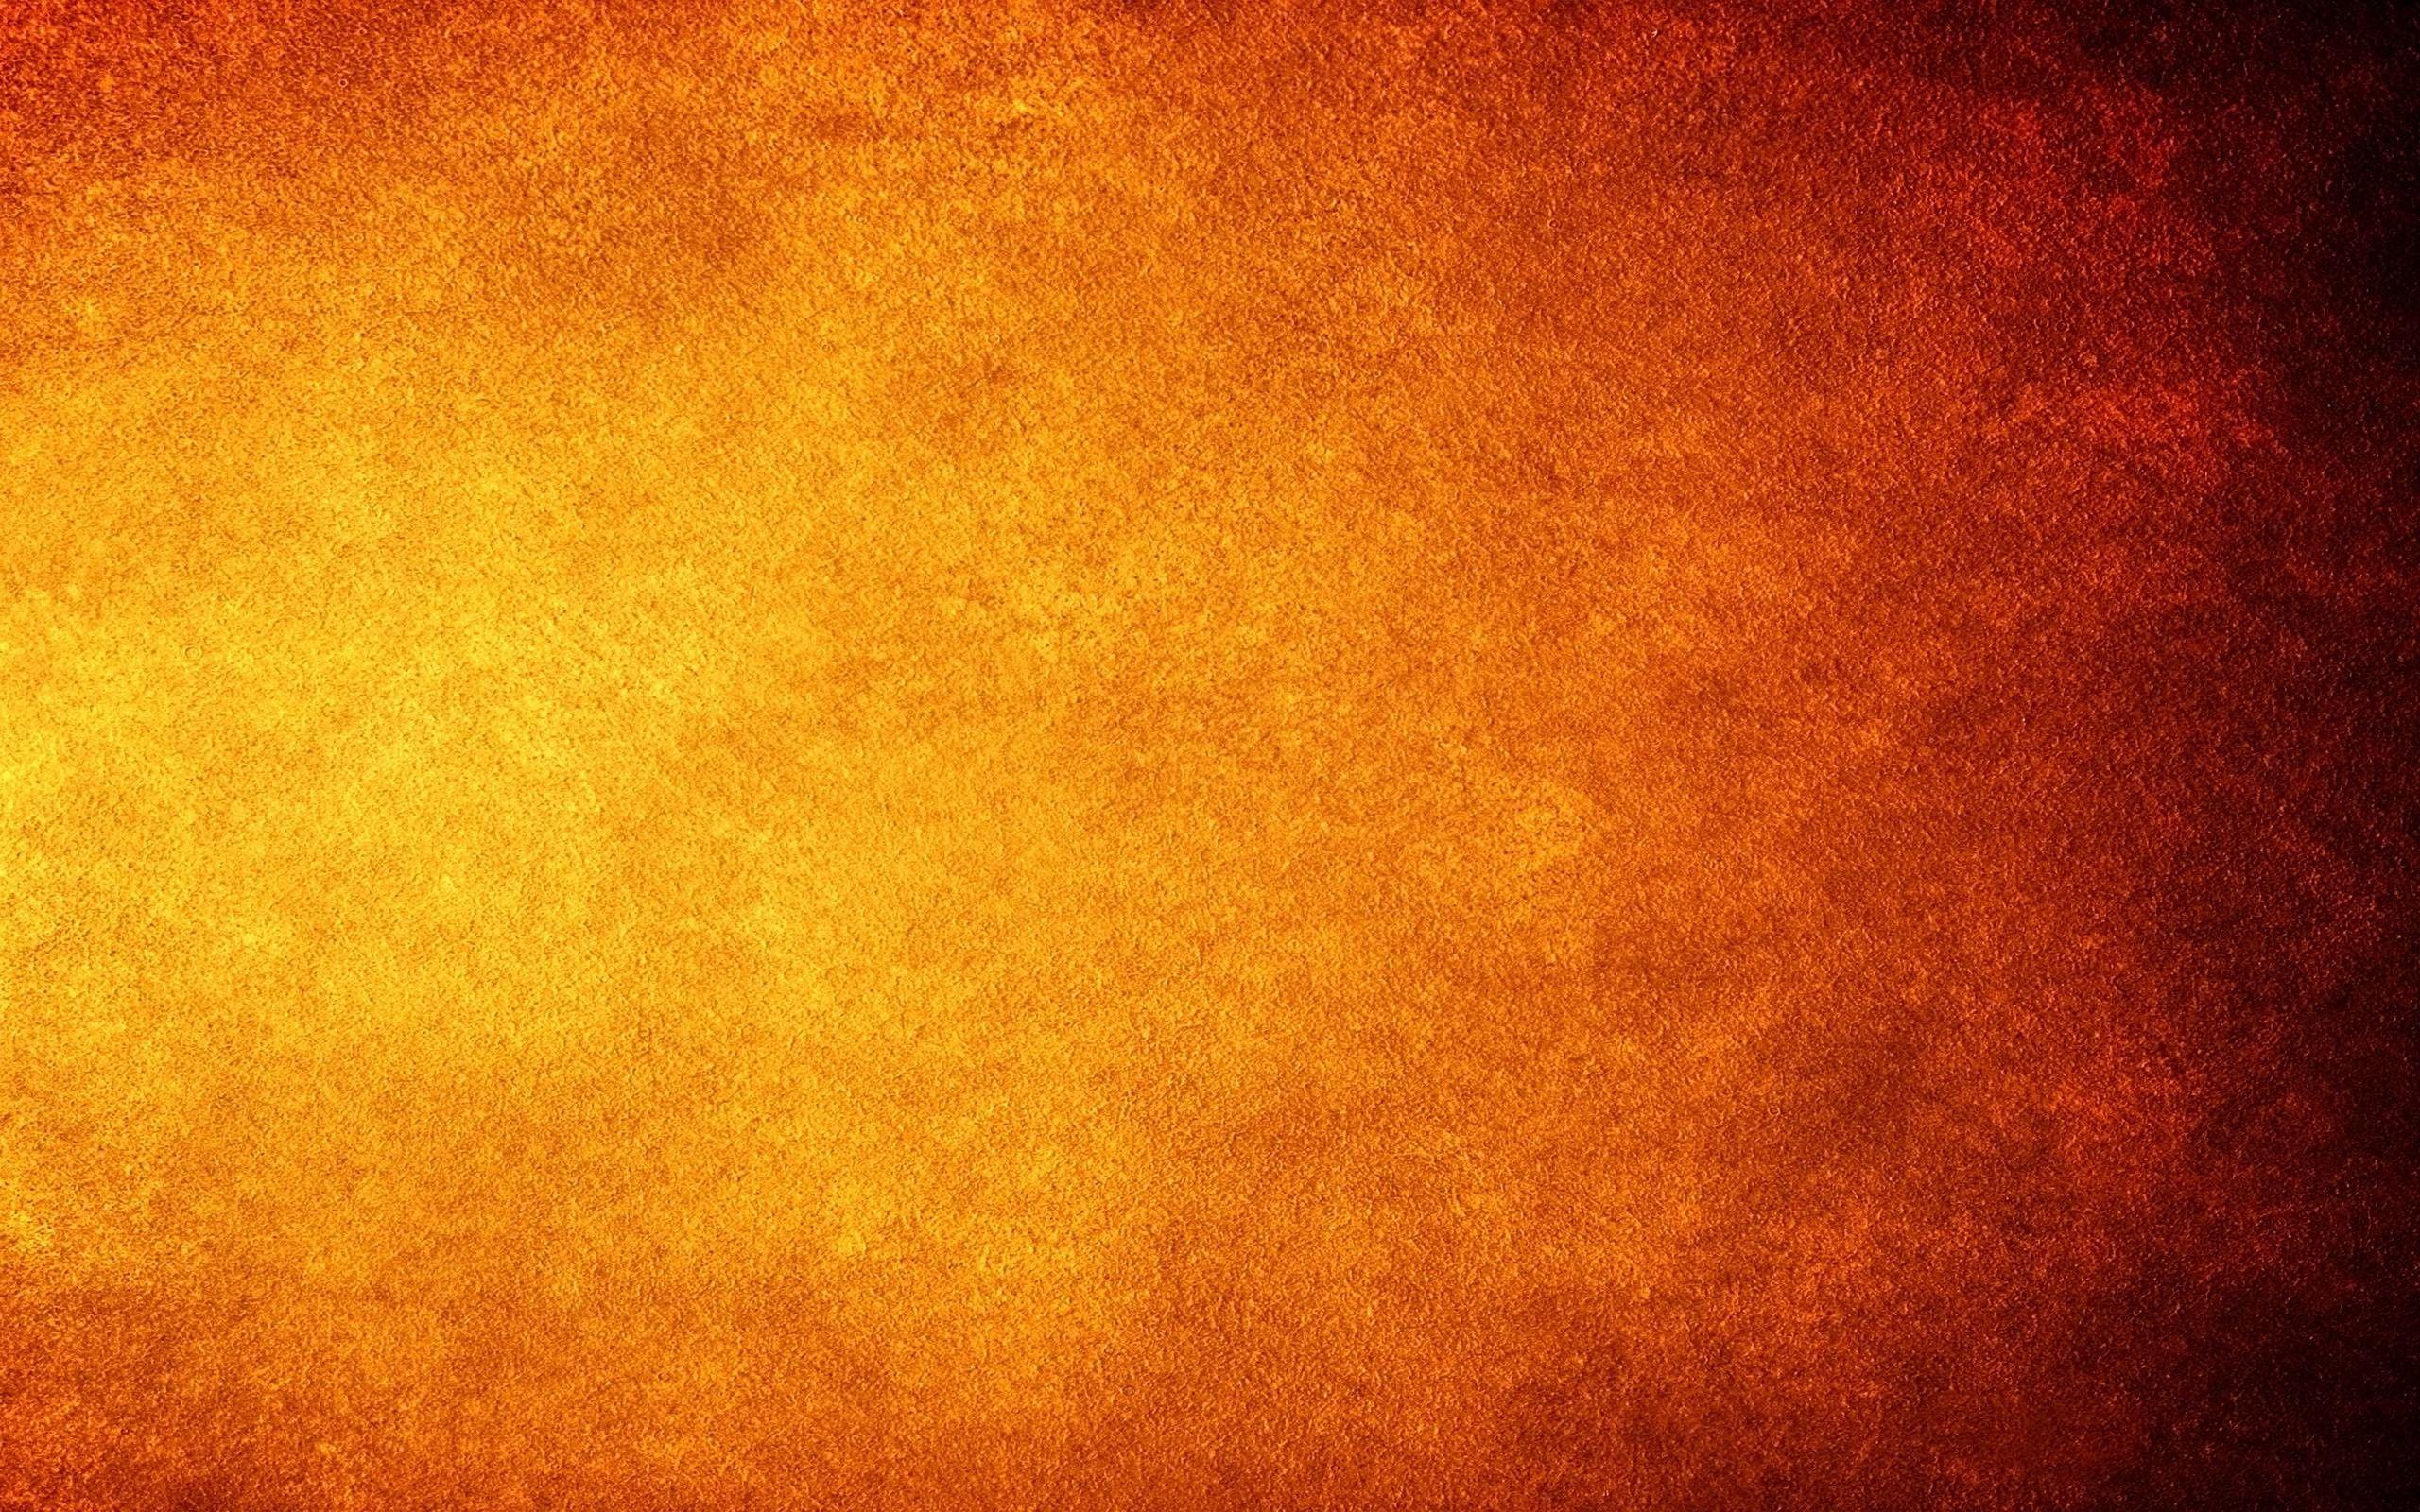 Fire Texture Orange Wallpapers  Fiercy Flame Wallpapers iPhone